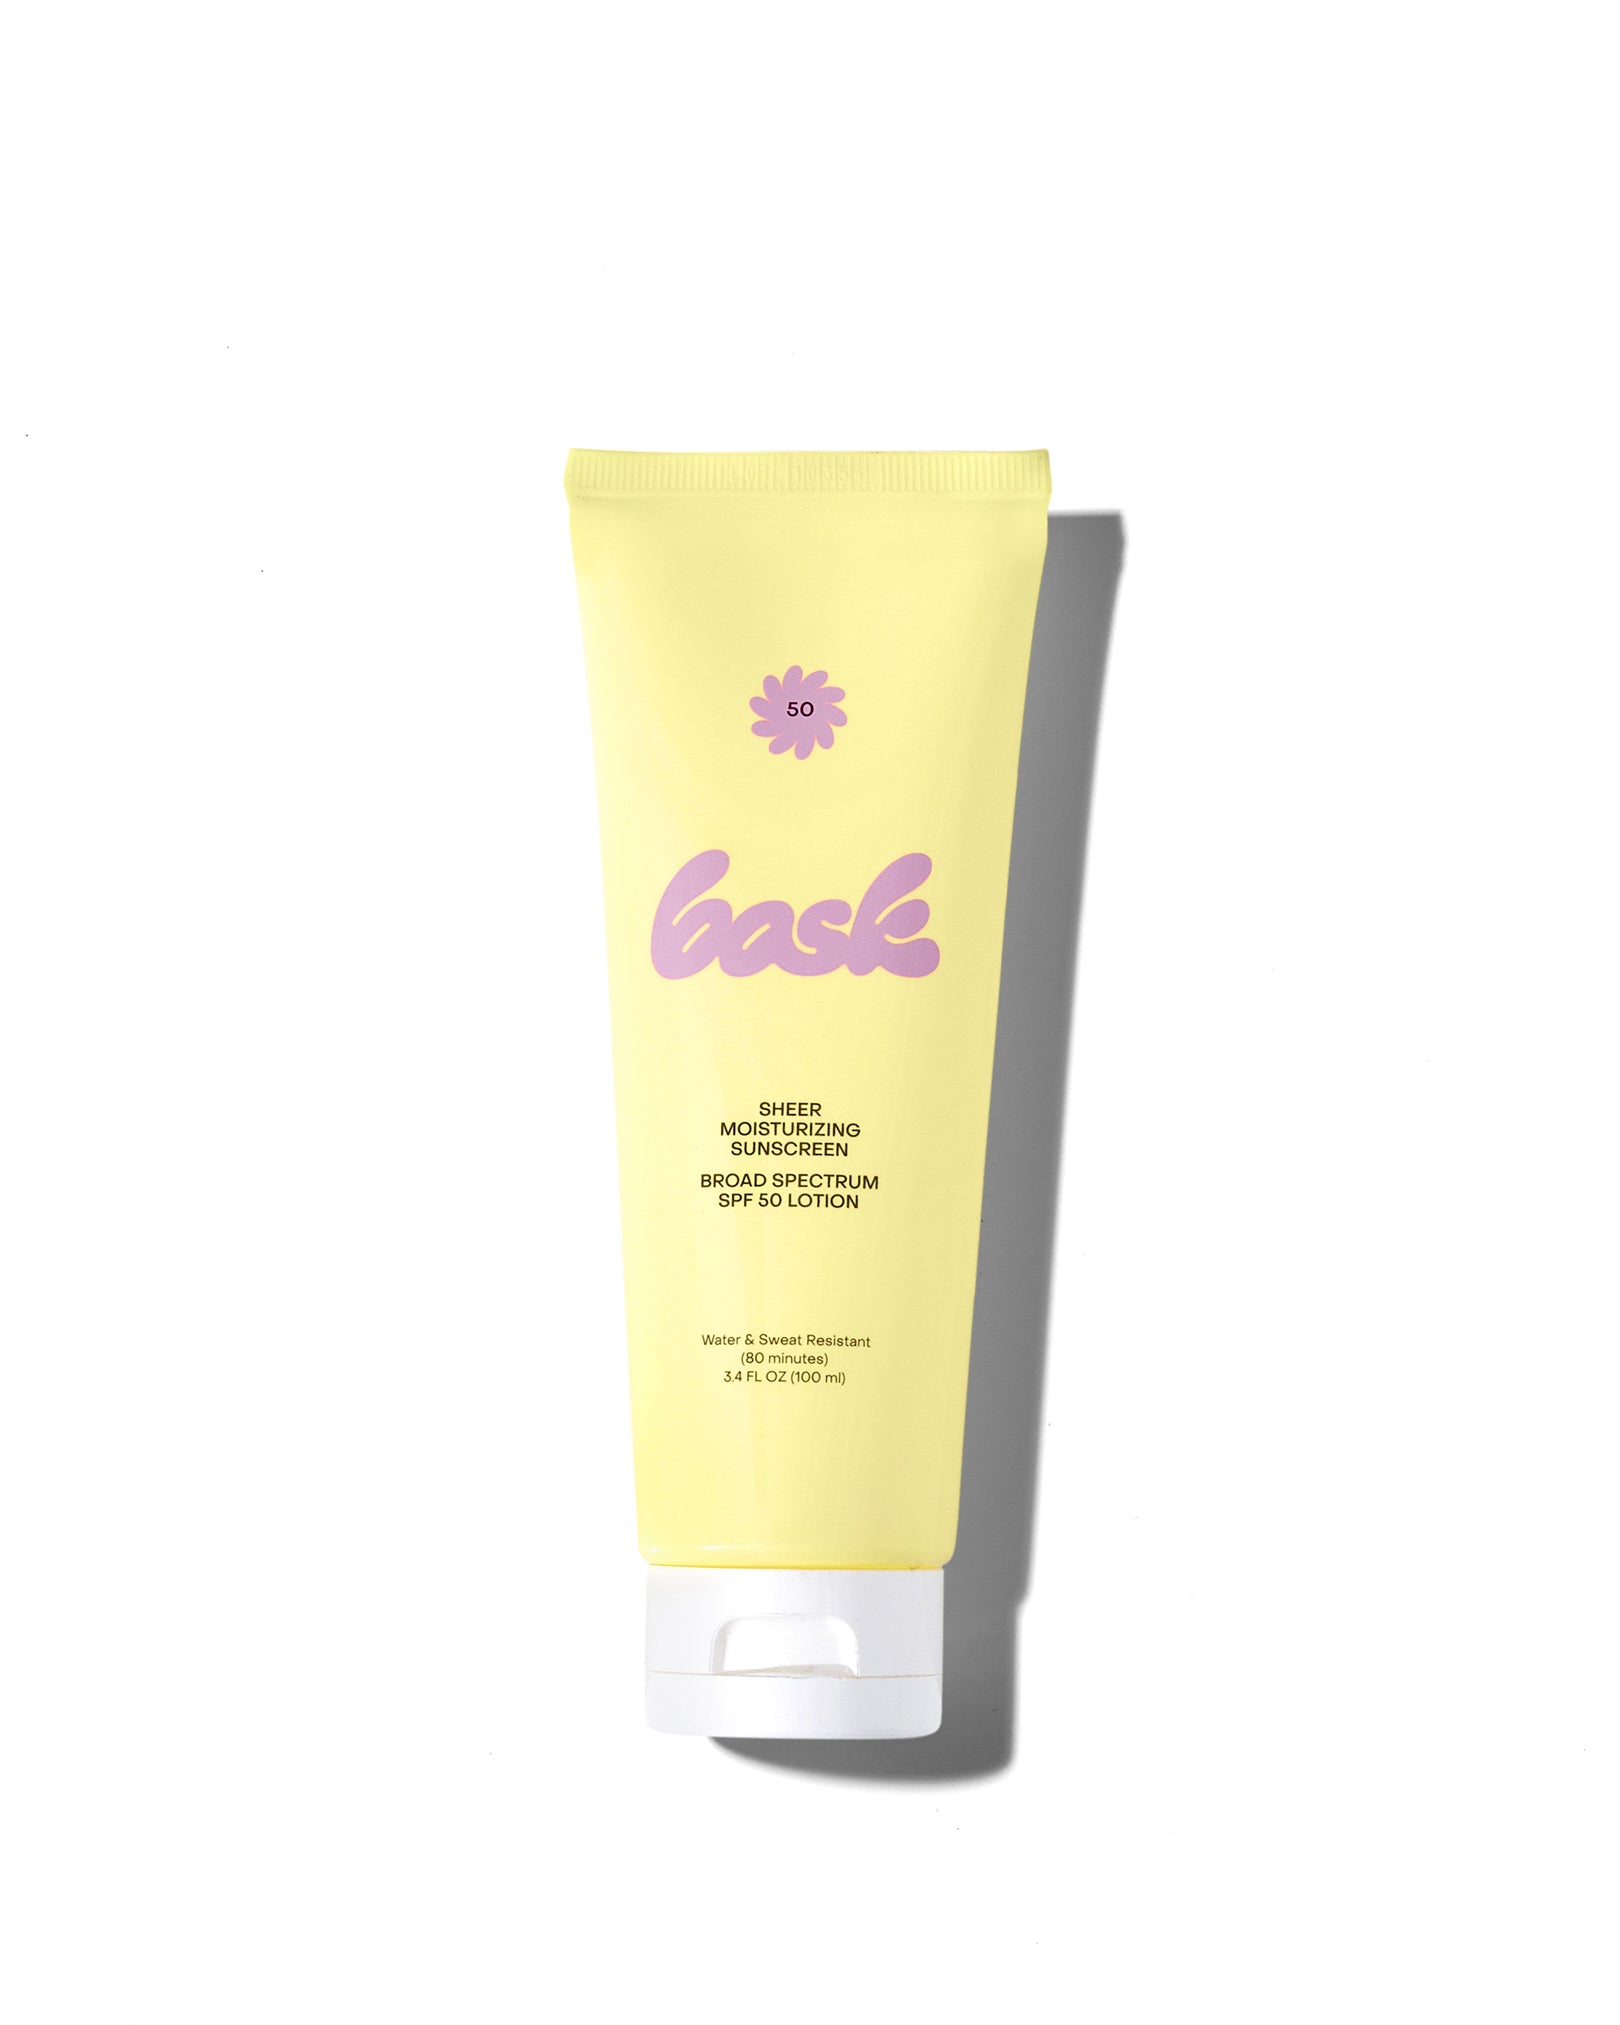 BASK Sheer Sunscreen Lotion in SPF 50 available at Lahn.shop